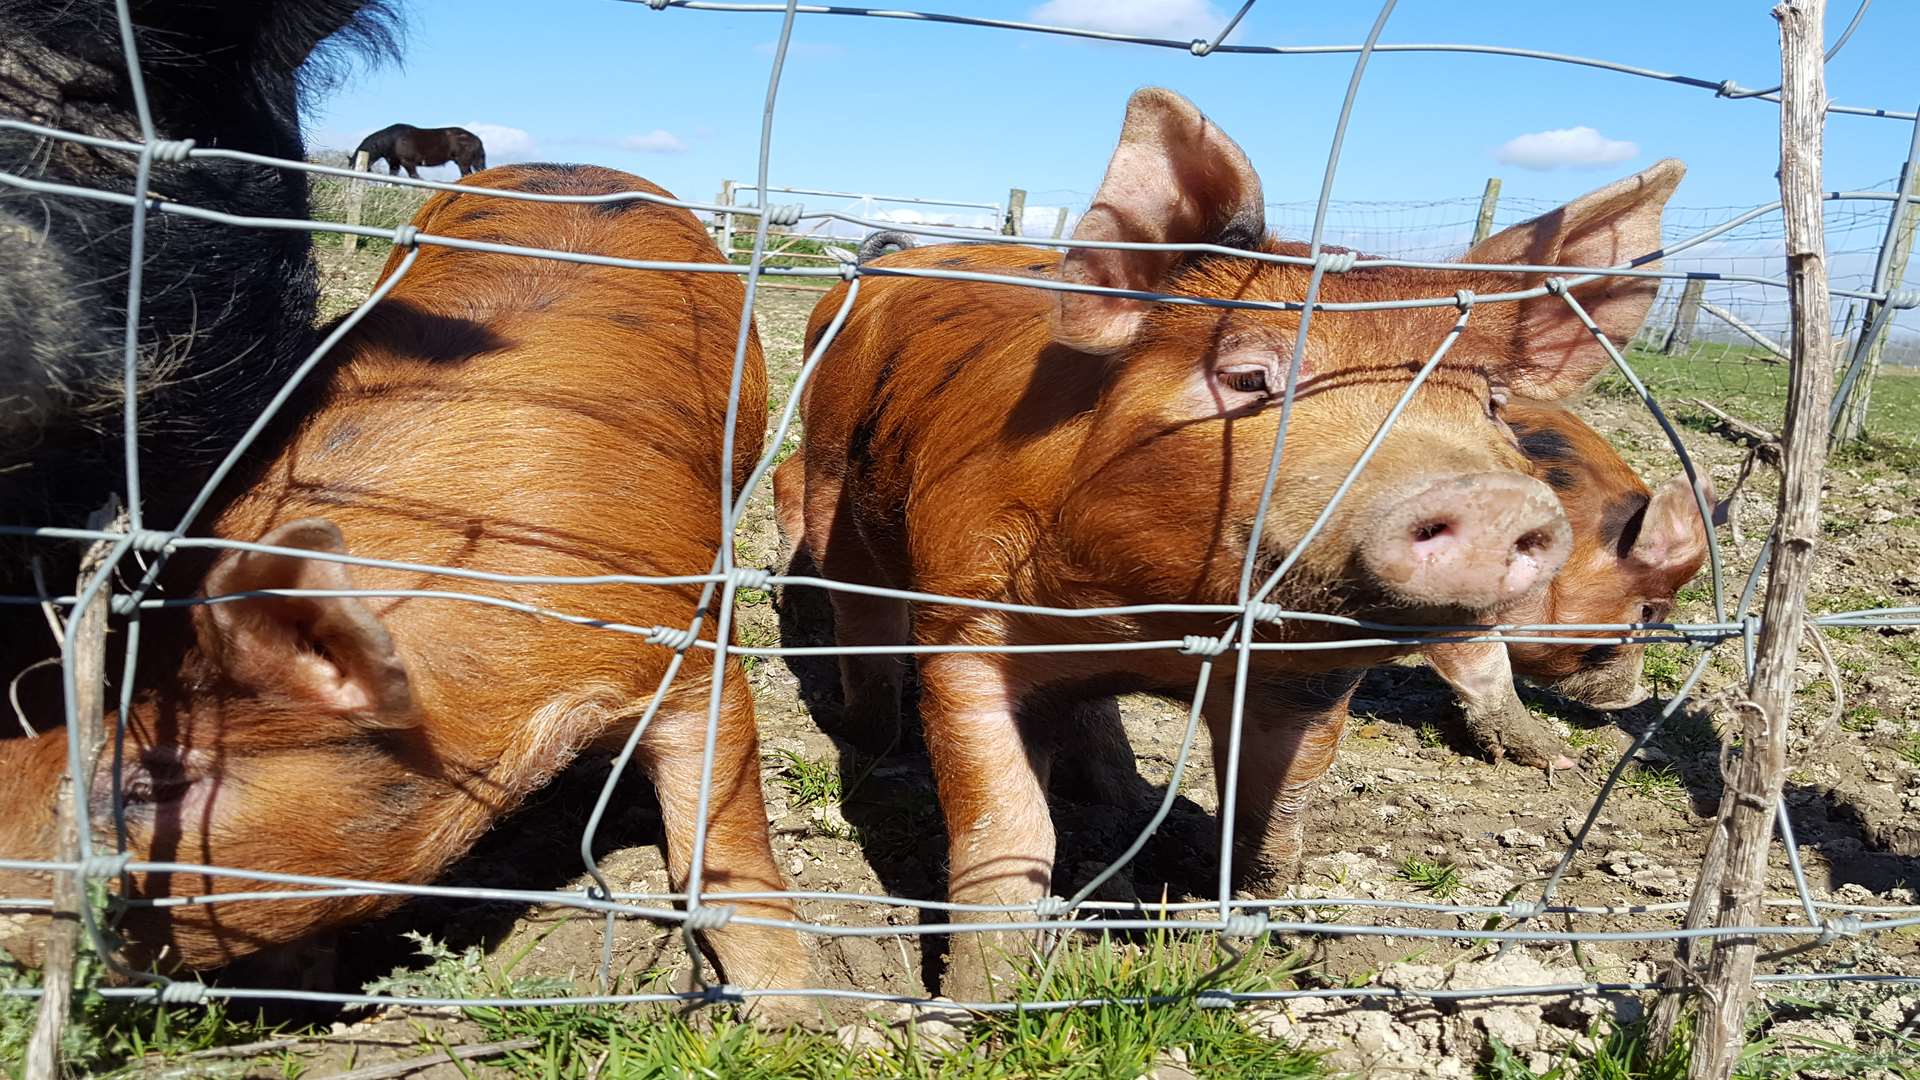 These curious looking pigs were all over the farm and the farmers were more than happy to let you pet them